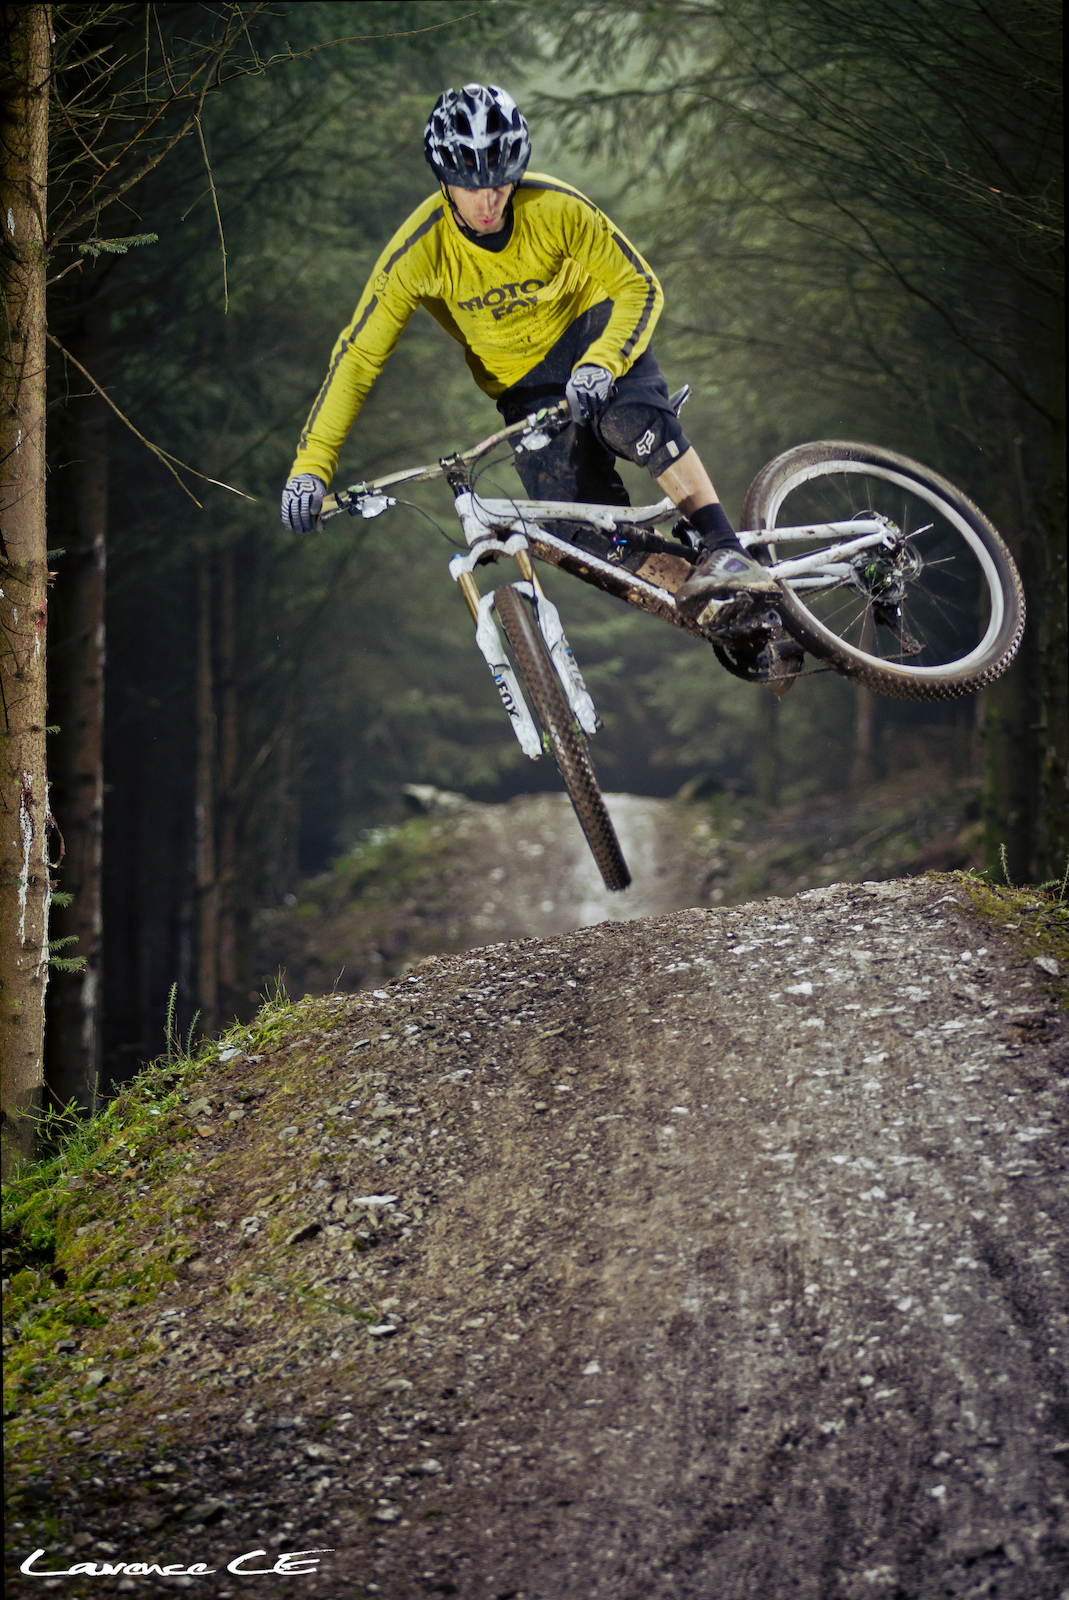 Donny getting some sly scrubby whips out. New trails are going down a treat - Laurence CE - www.laurence-ce.com